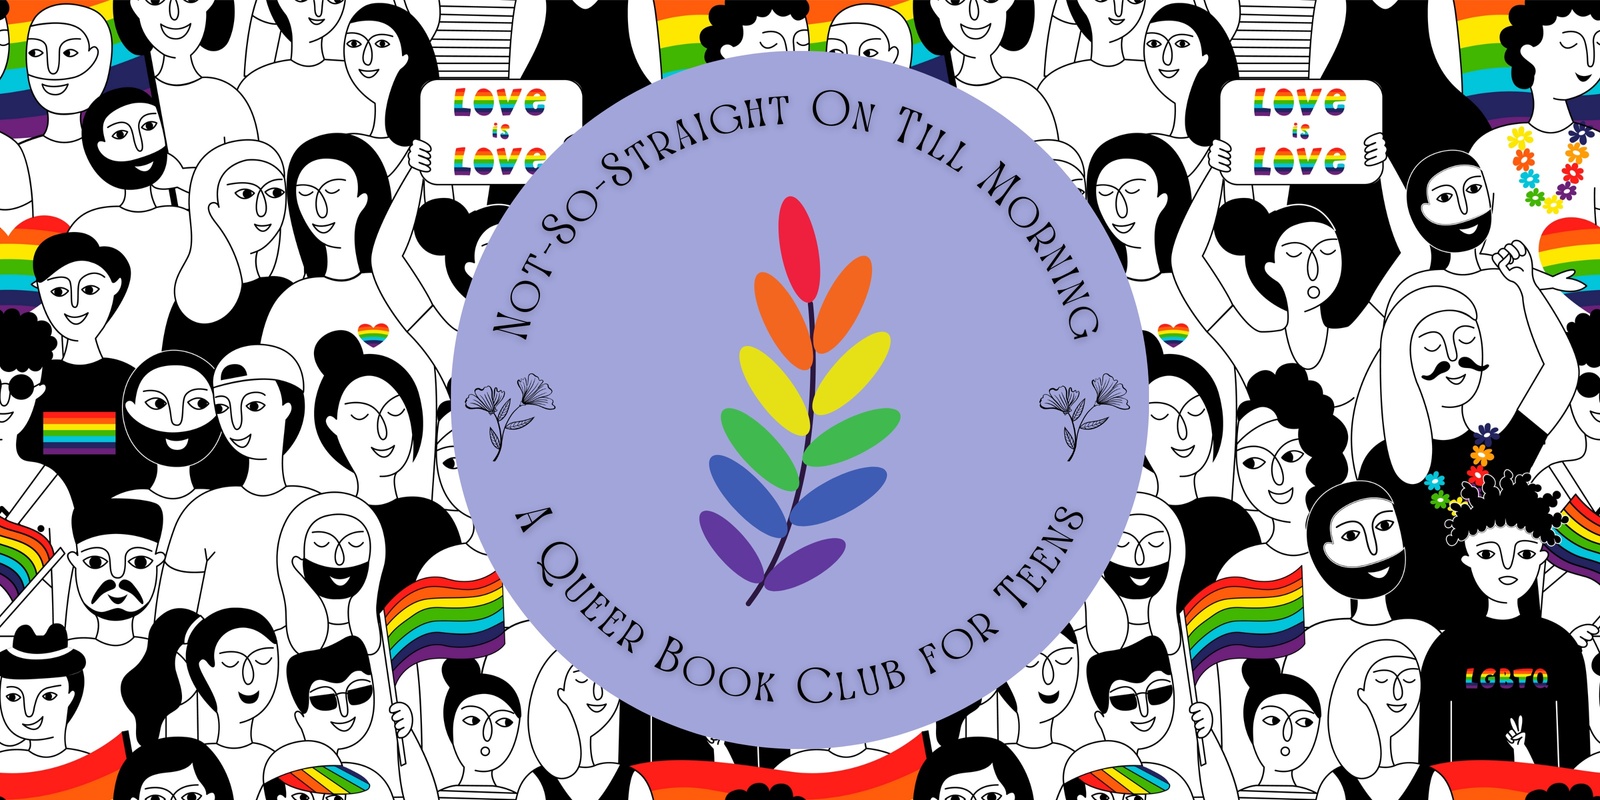 Banner image for Not-So-Straight On Till Morning: A Queer Book Club for Teens